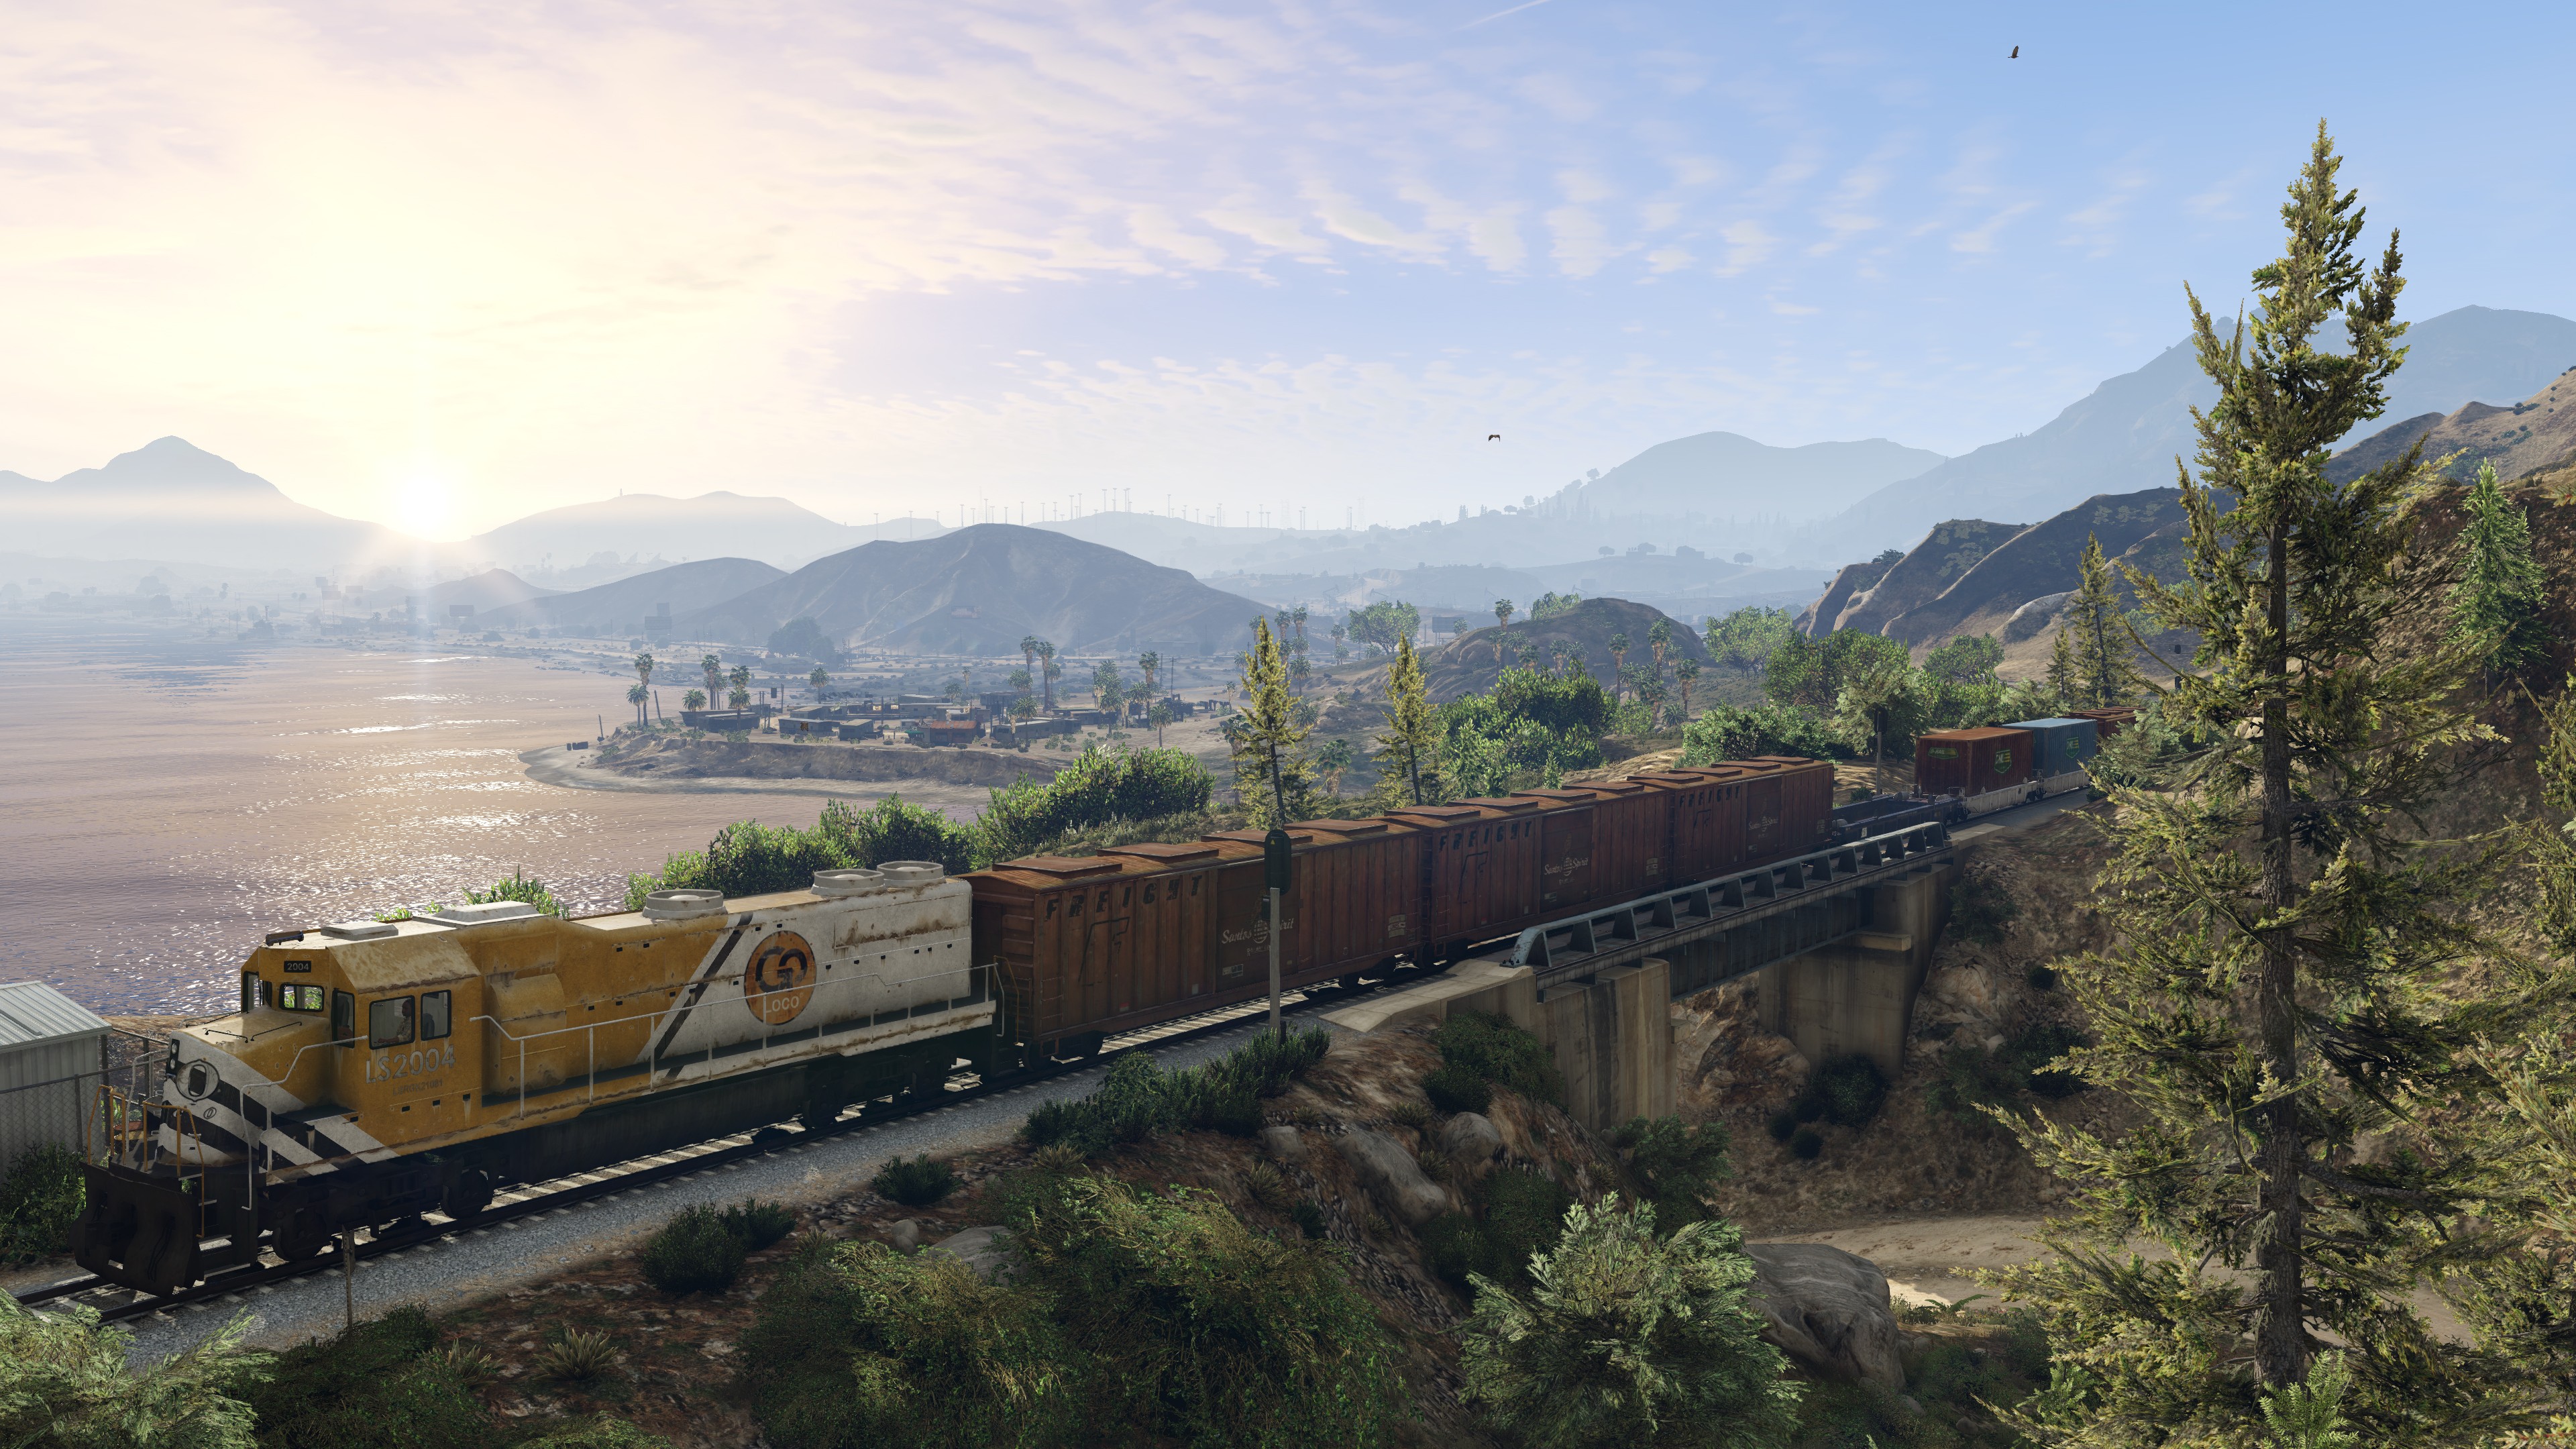 General 3840x2160 Grand Theft Auto V train video games PC gaming vehicle video game landscape screen shot freight train